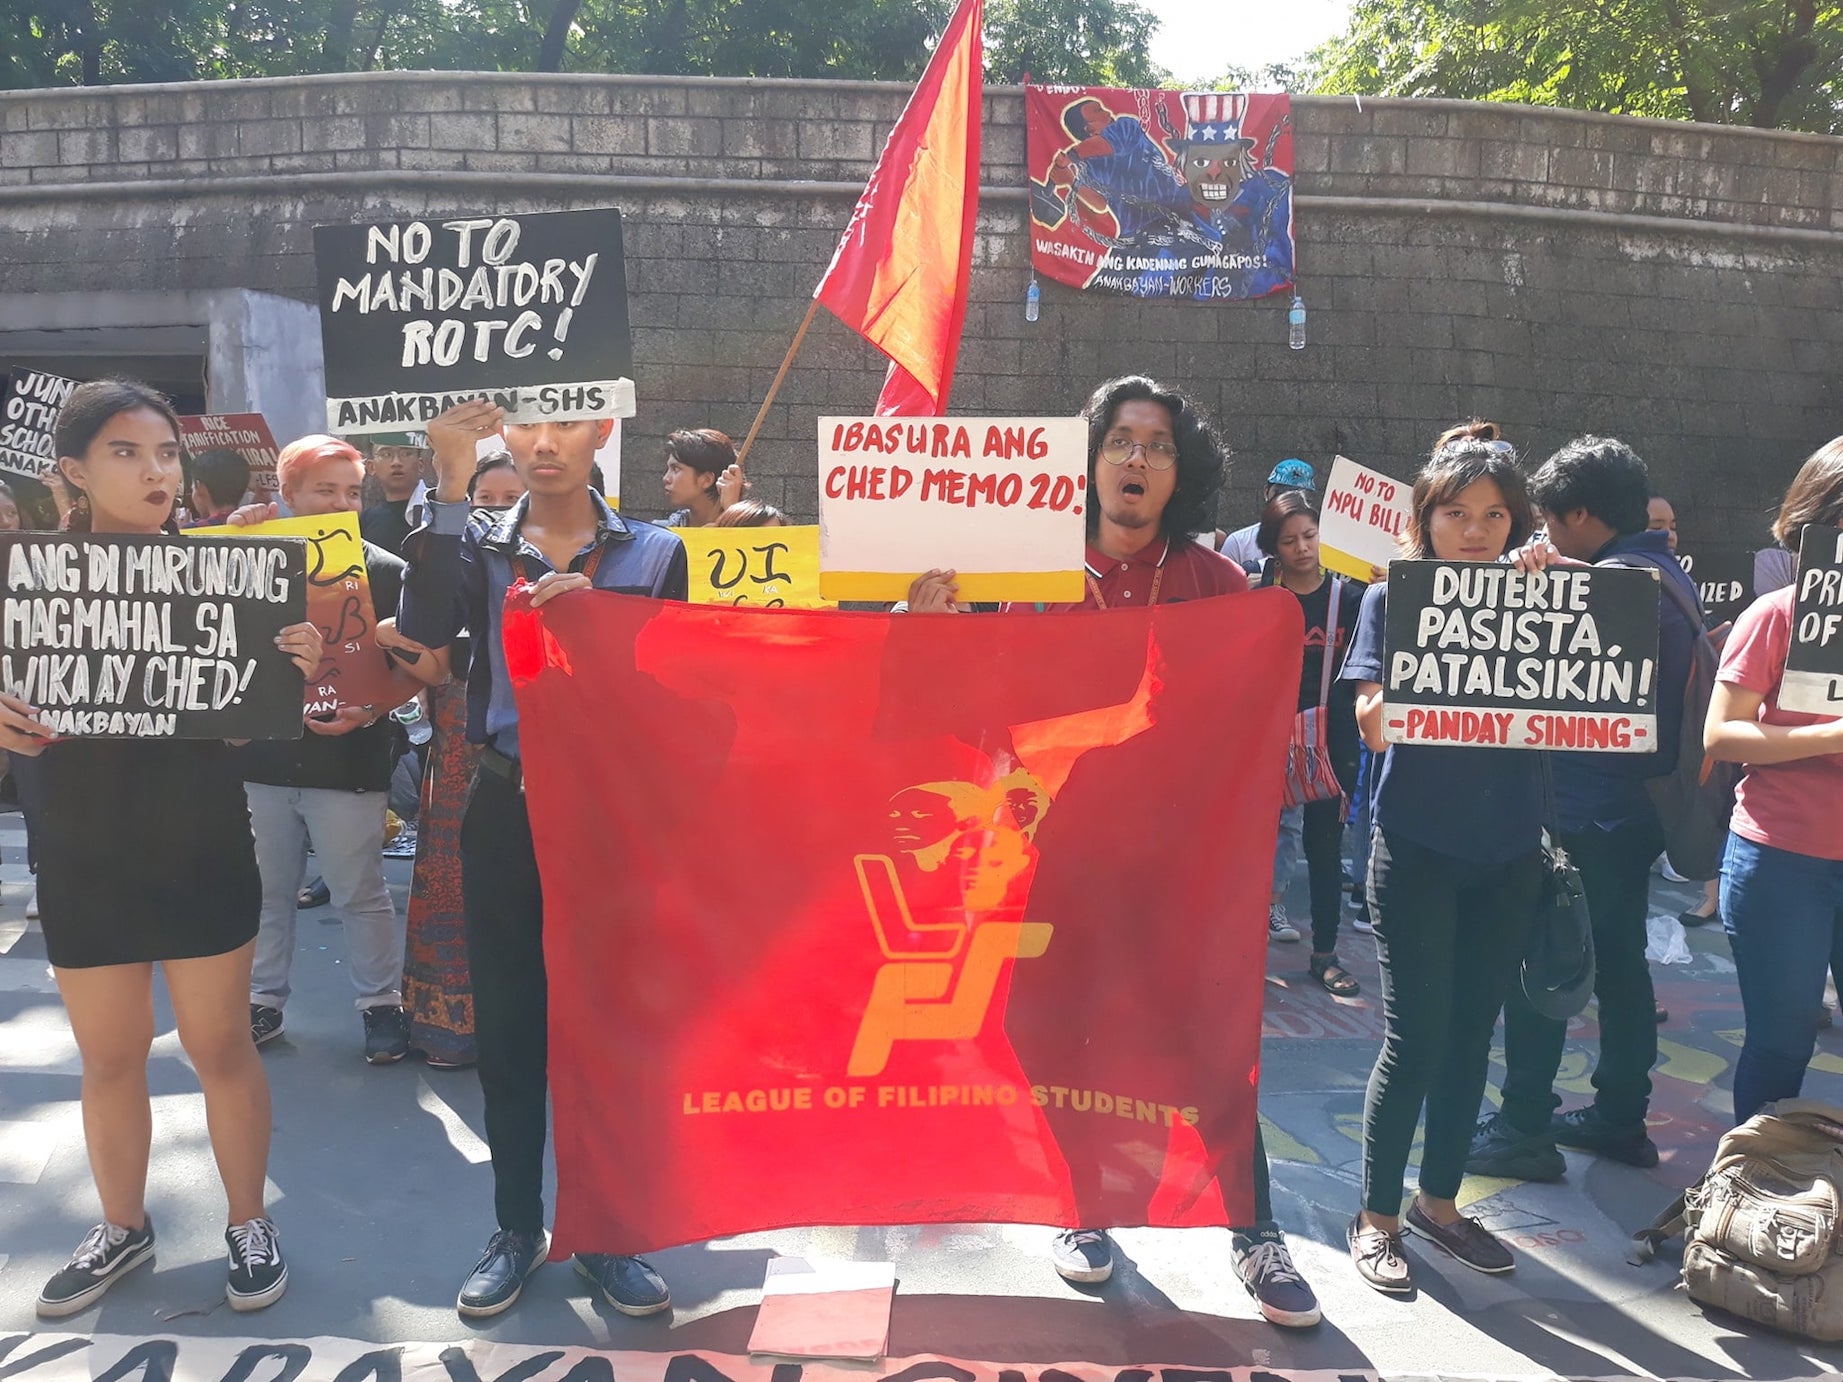 Members of the League of Filipino Students protest against mandatory ROTC. Photo: League of Filipino Students' Facebook page